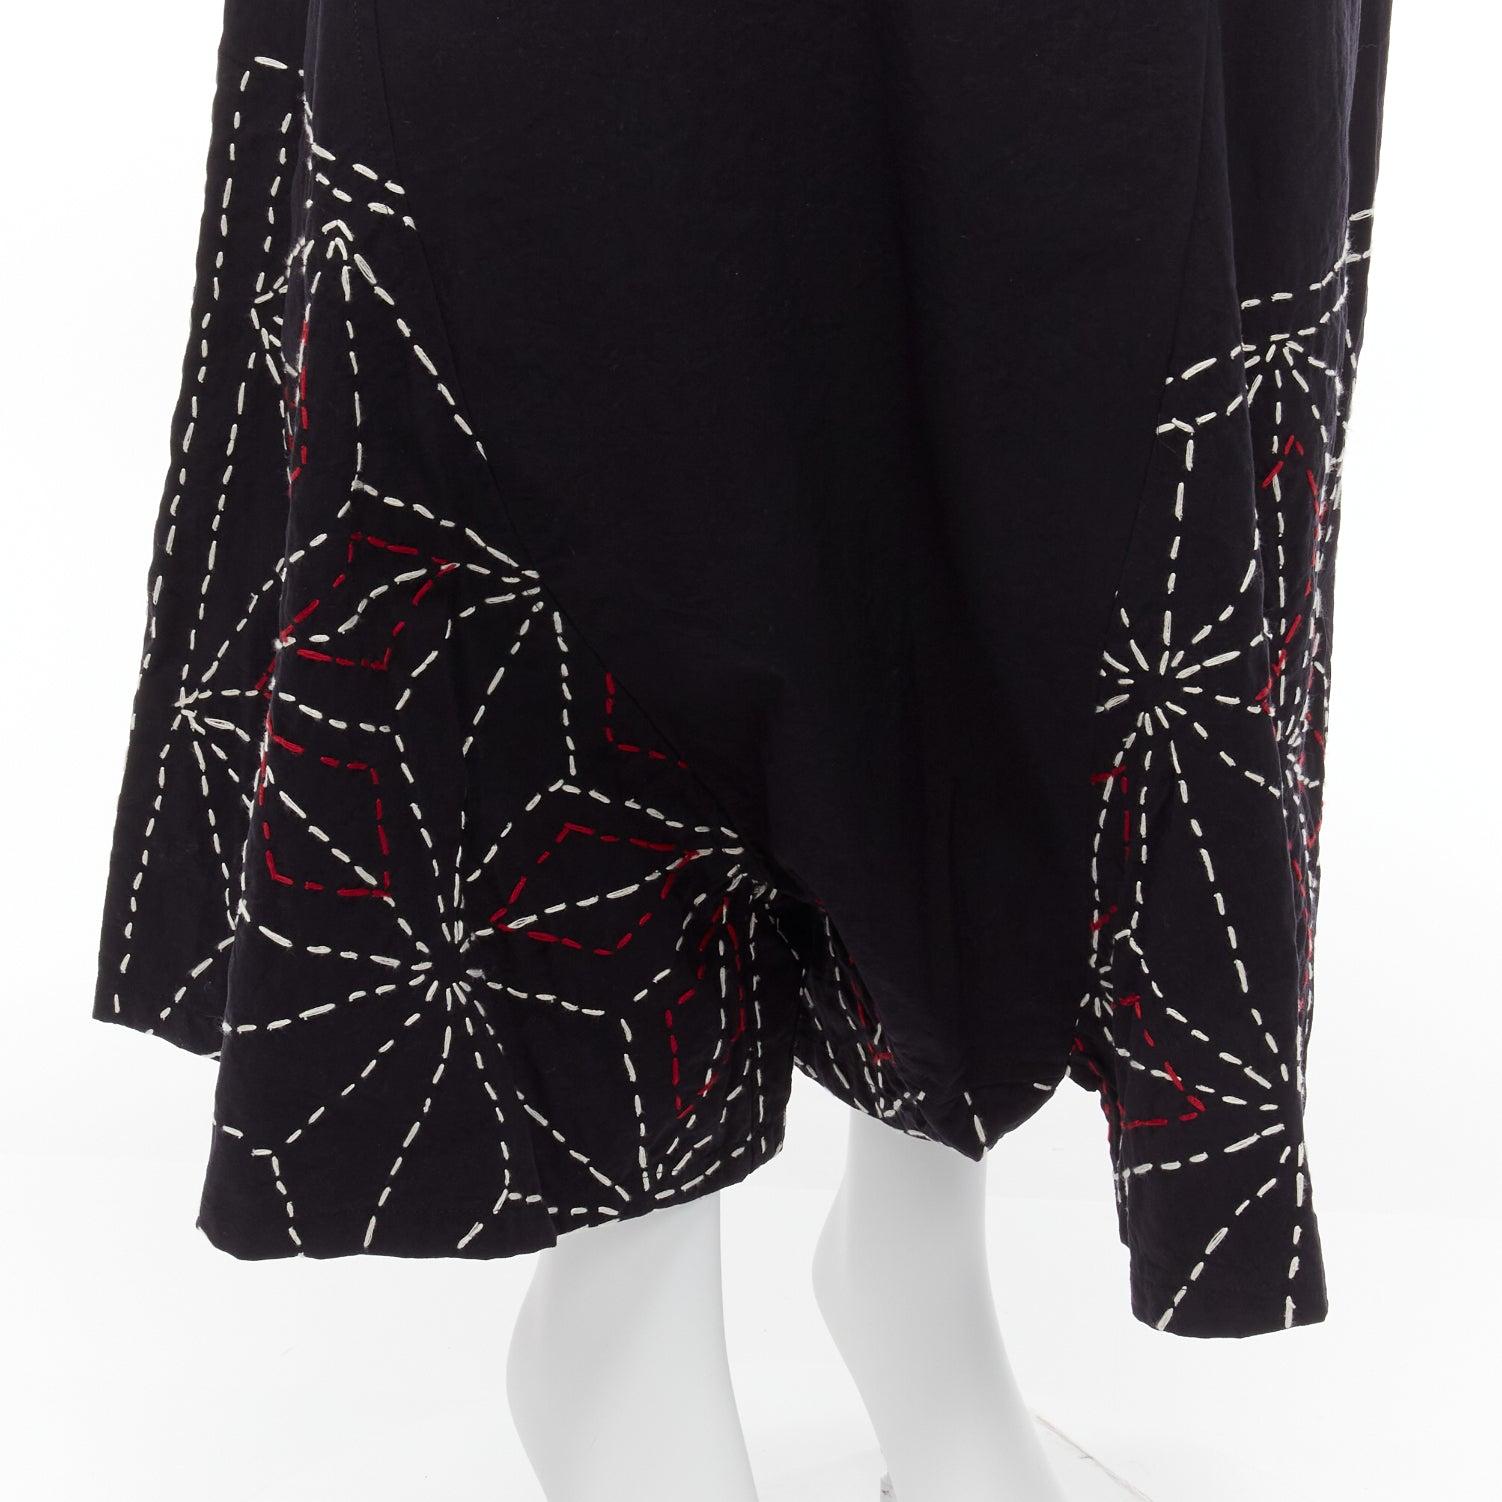 rare Y'S YOHJI YAMAMOTO red white hand stitched detail asymmetric harem pants JP2 M
Reference: CAWG/A00290
Brand: Yohji Yamamoto
Collection: Y'S
Material: Nylon
Color: Black, Multicolour
Pattern: Abstract
Closure: Zip Fly
Extra Details: Dropped low